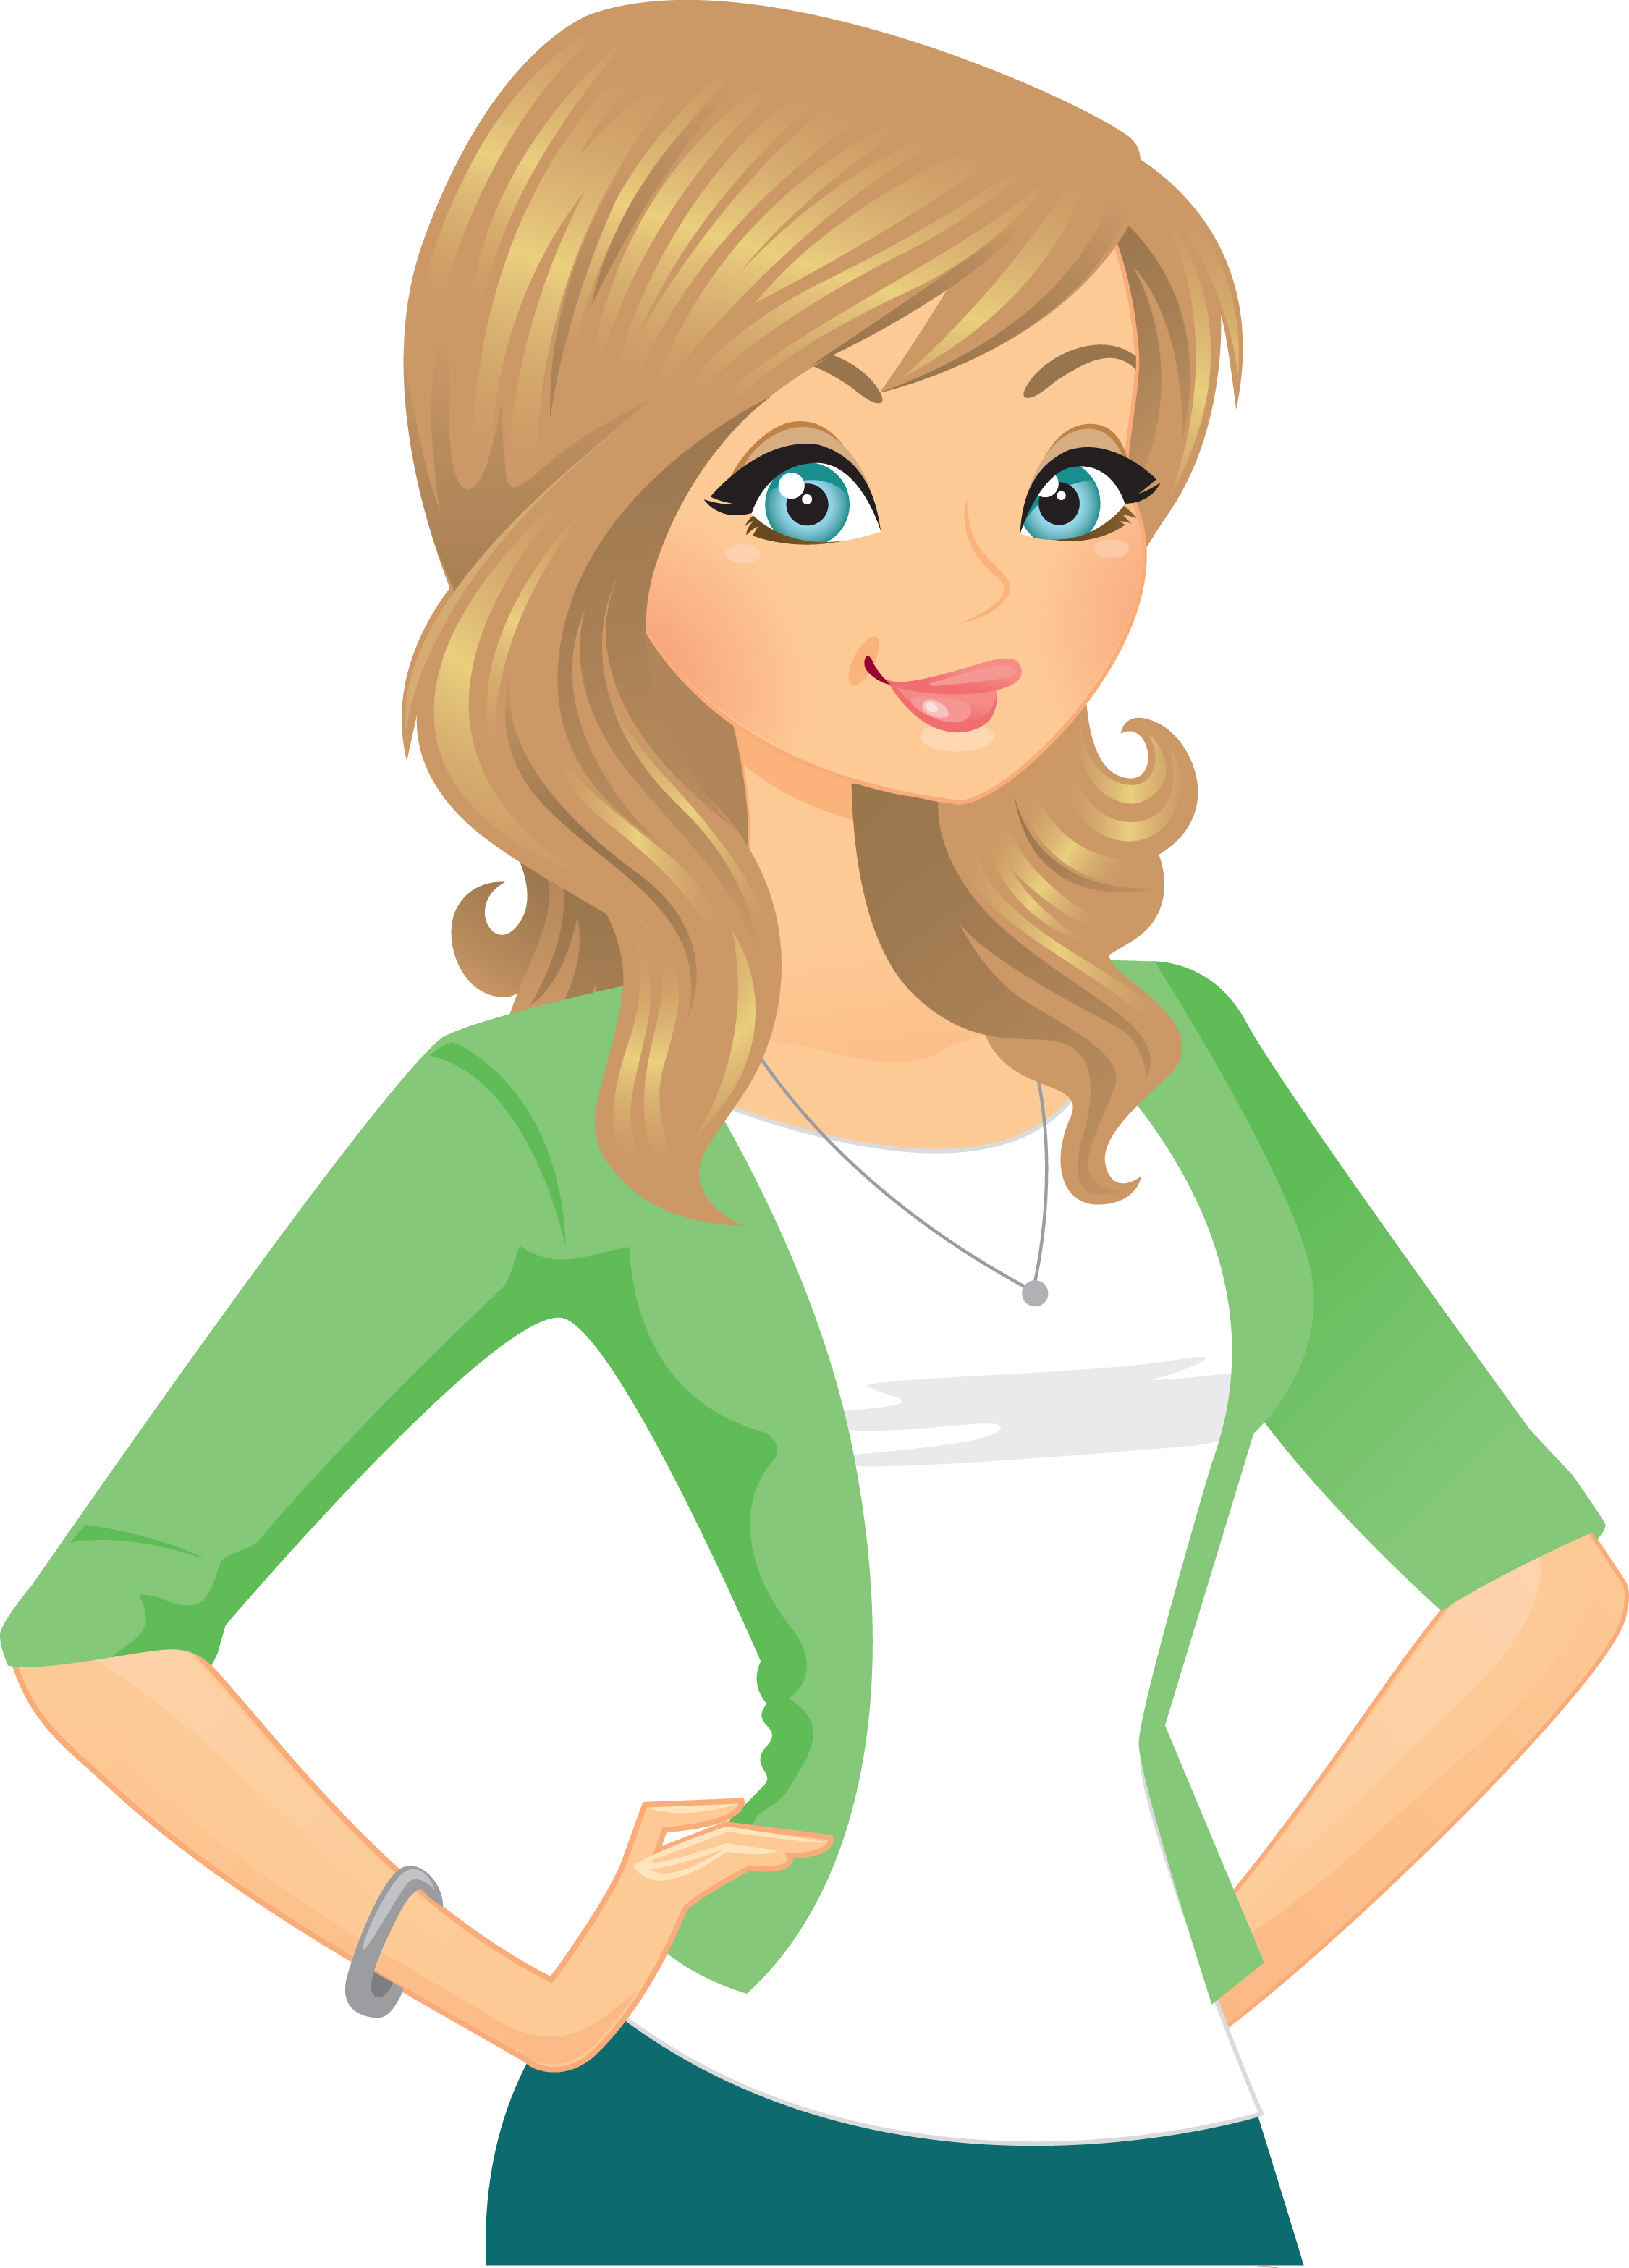 Lady Animated Sticker Lady Animated Cute Descubre Y Comparte Gif My